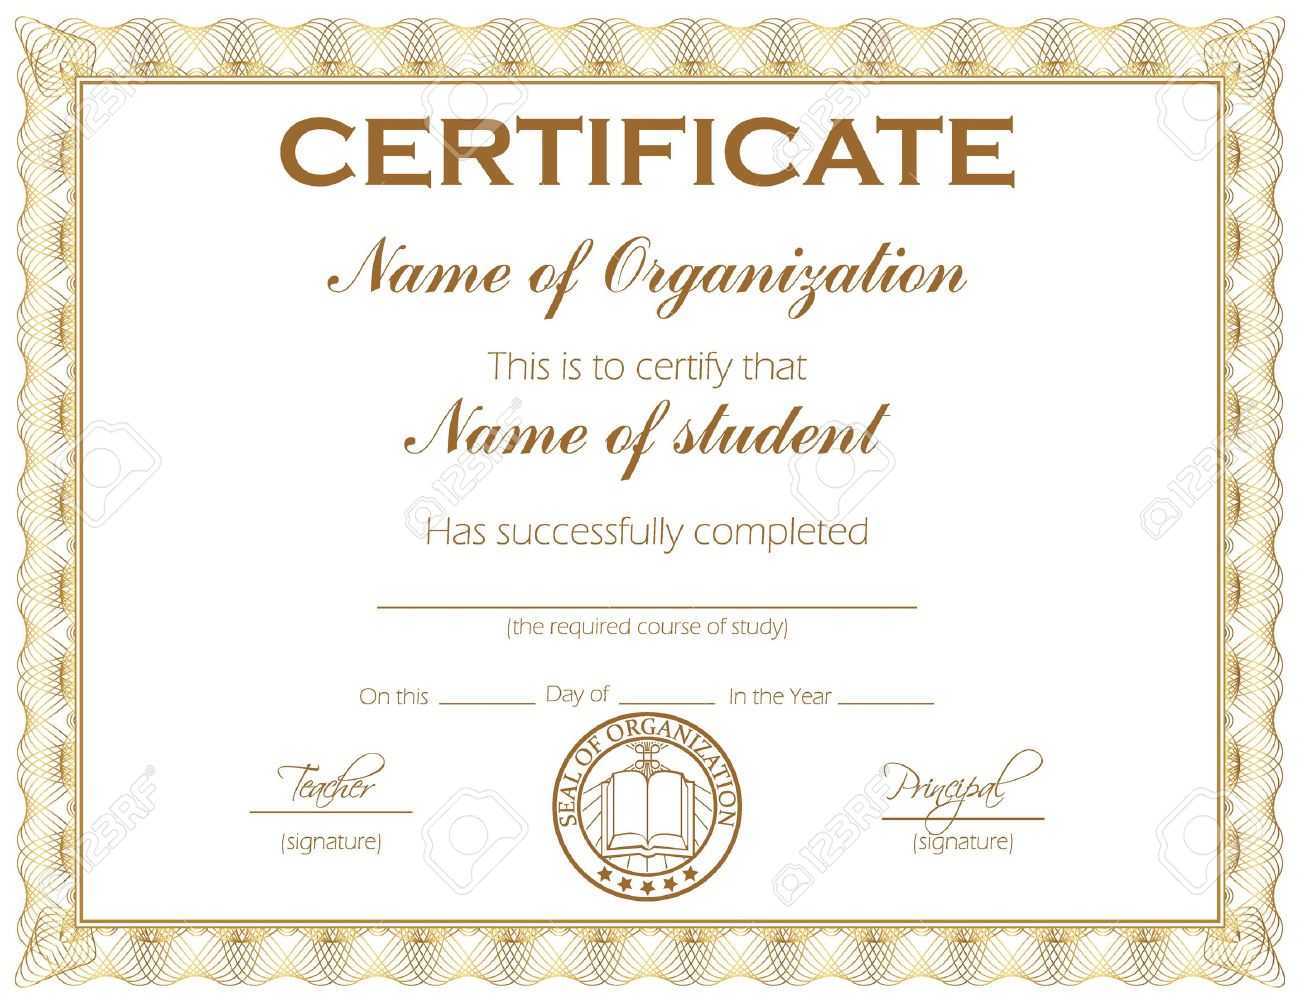 General Purpose Certificate Or Award With Sample Text That Can.. Within Student Of The Year Award Certificate Templates